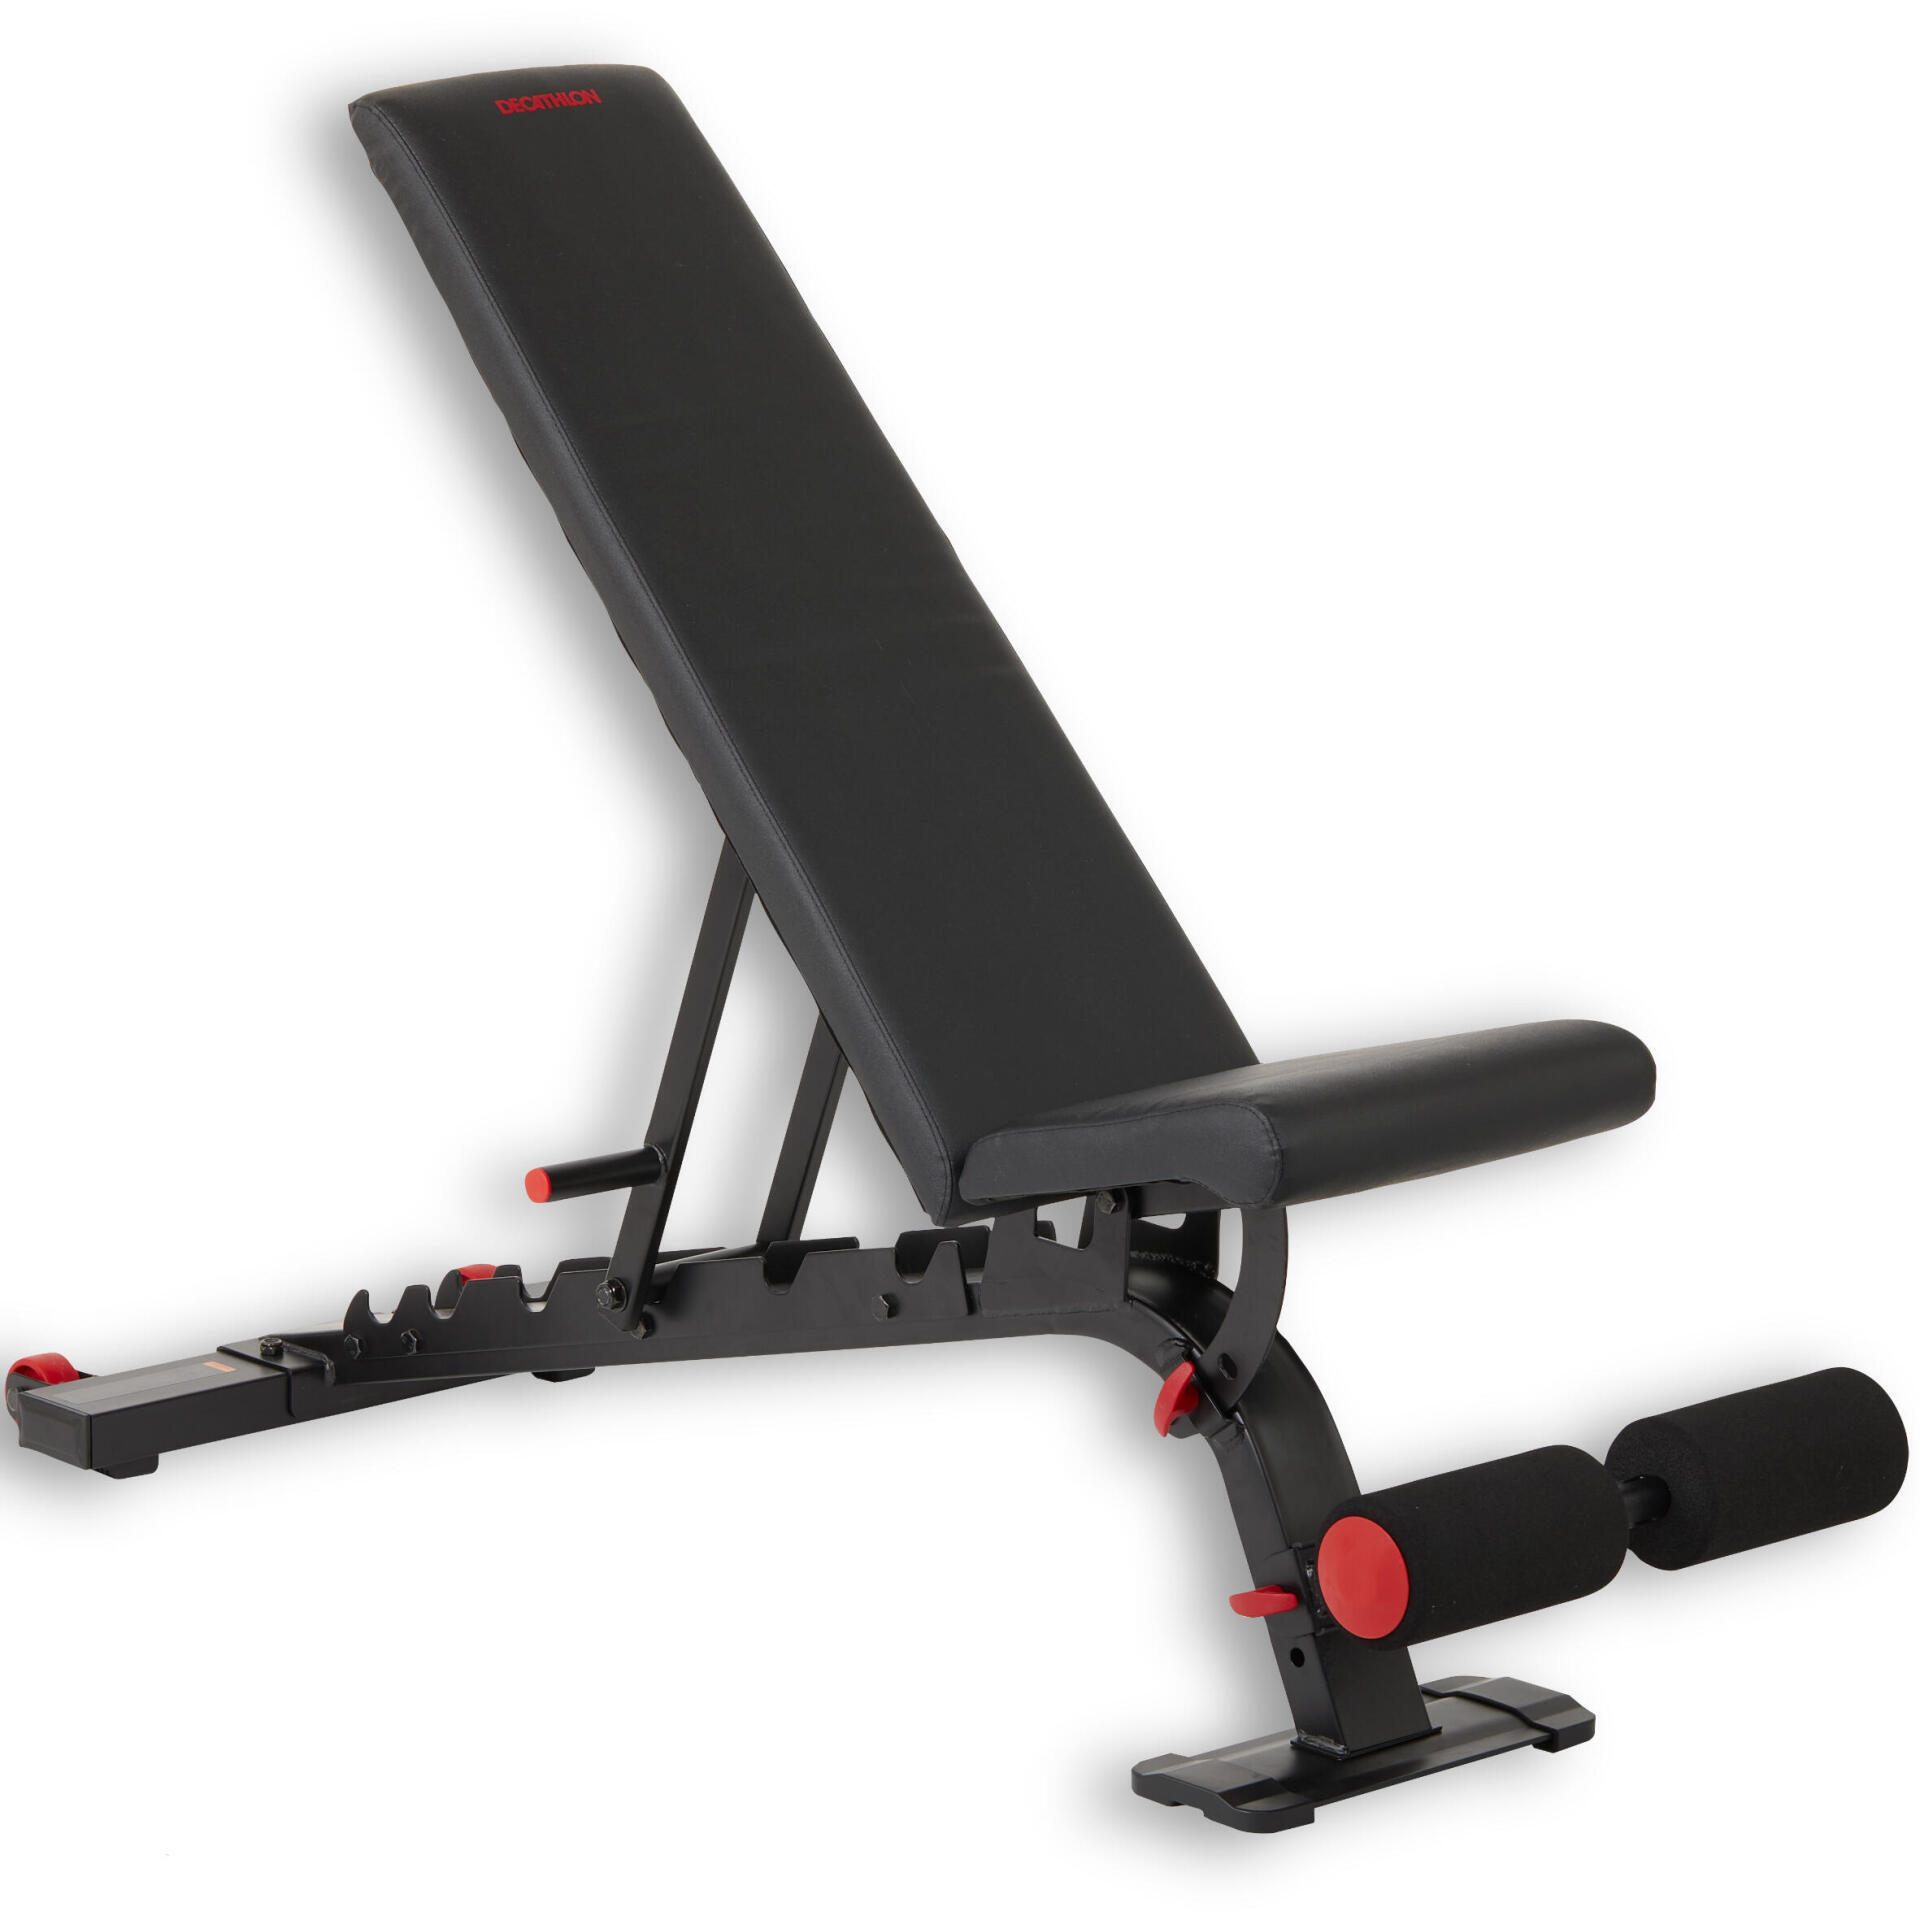 Decathlon weight benches that allow different angle pecs workouts. 